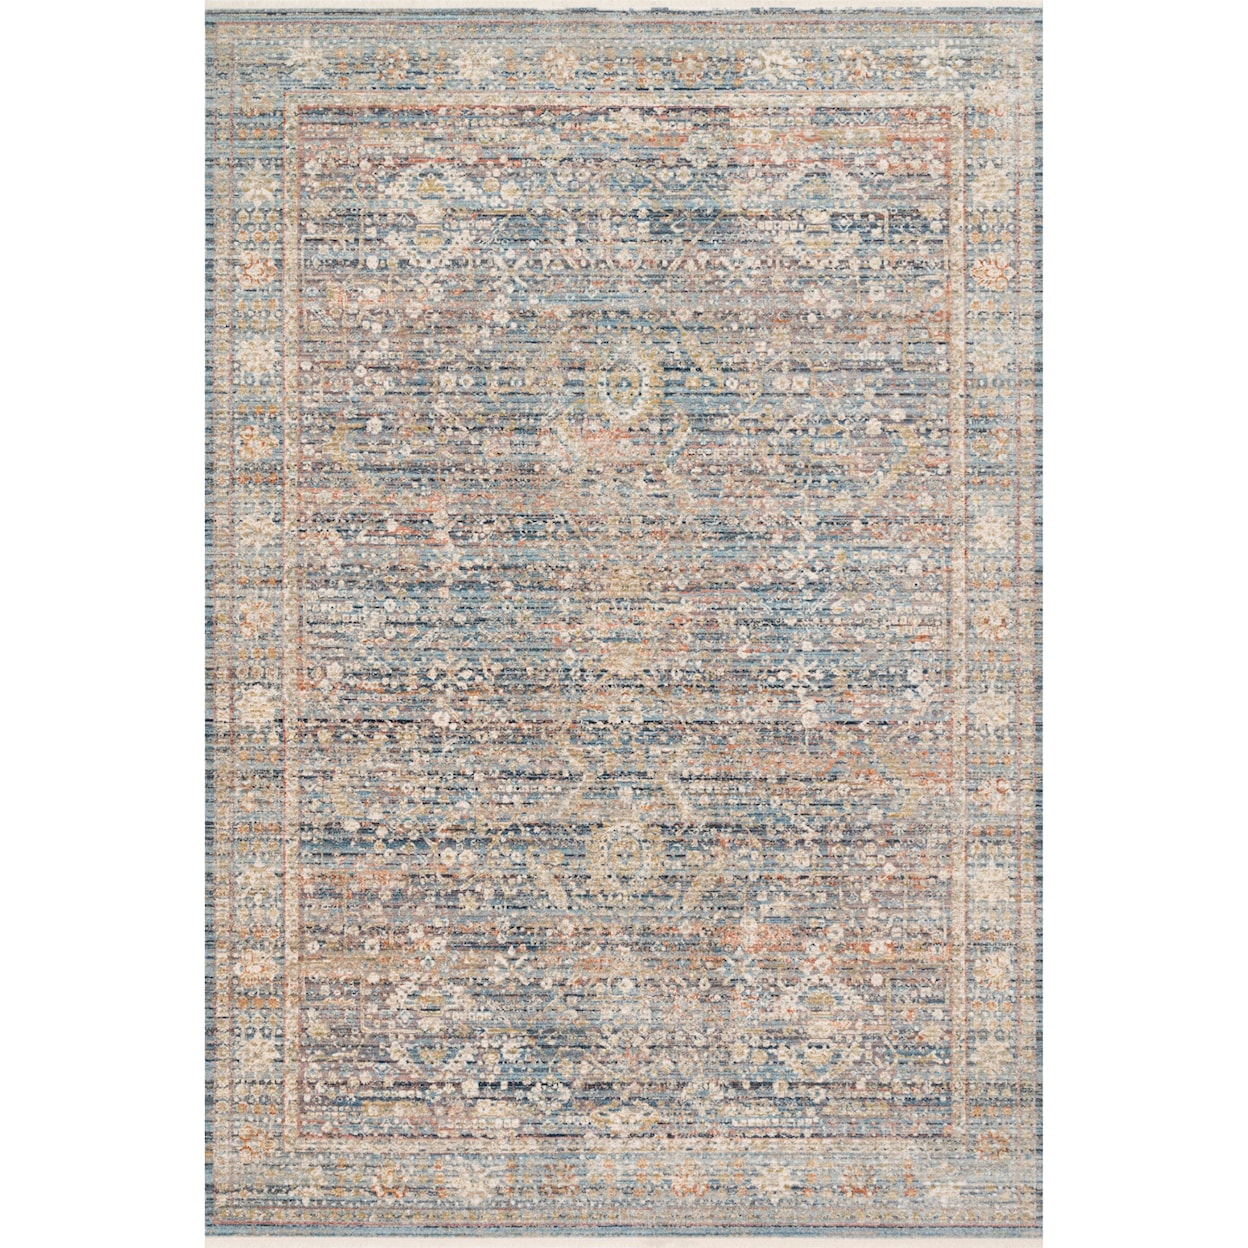 Reeds Rugs Claire 9'6" x 13' Blue / Sunset Rug